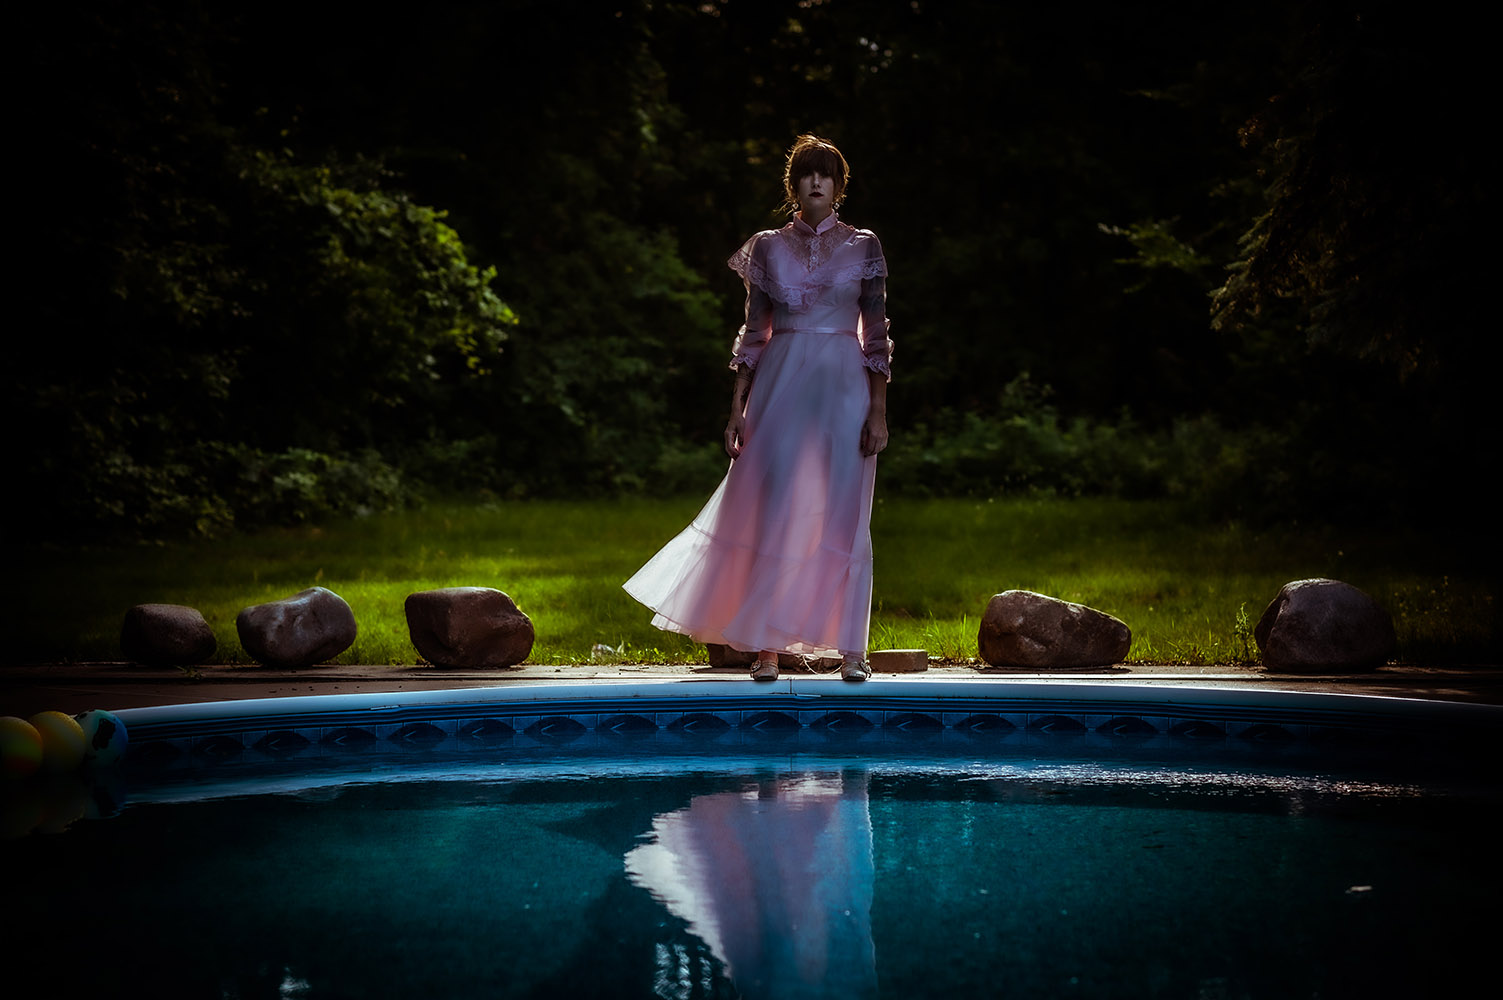 woman in a dress by a pool